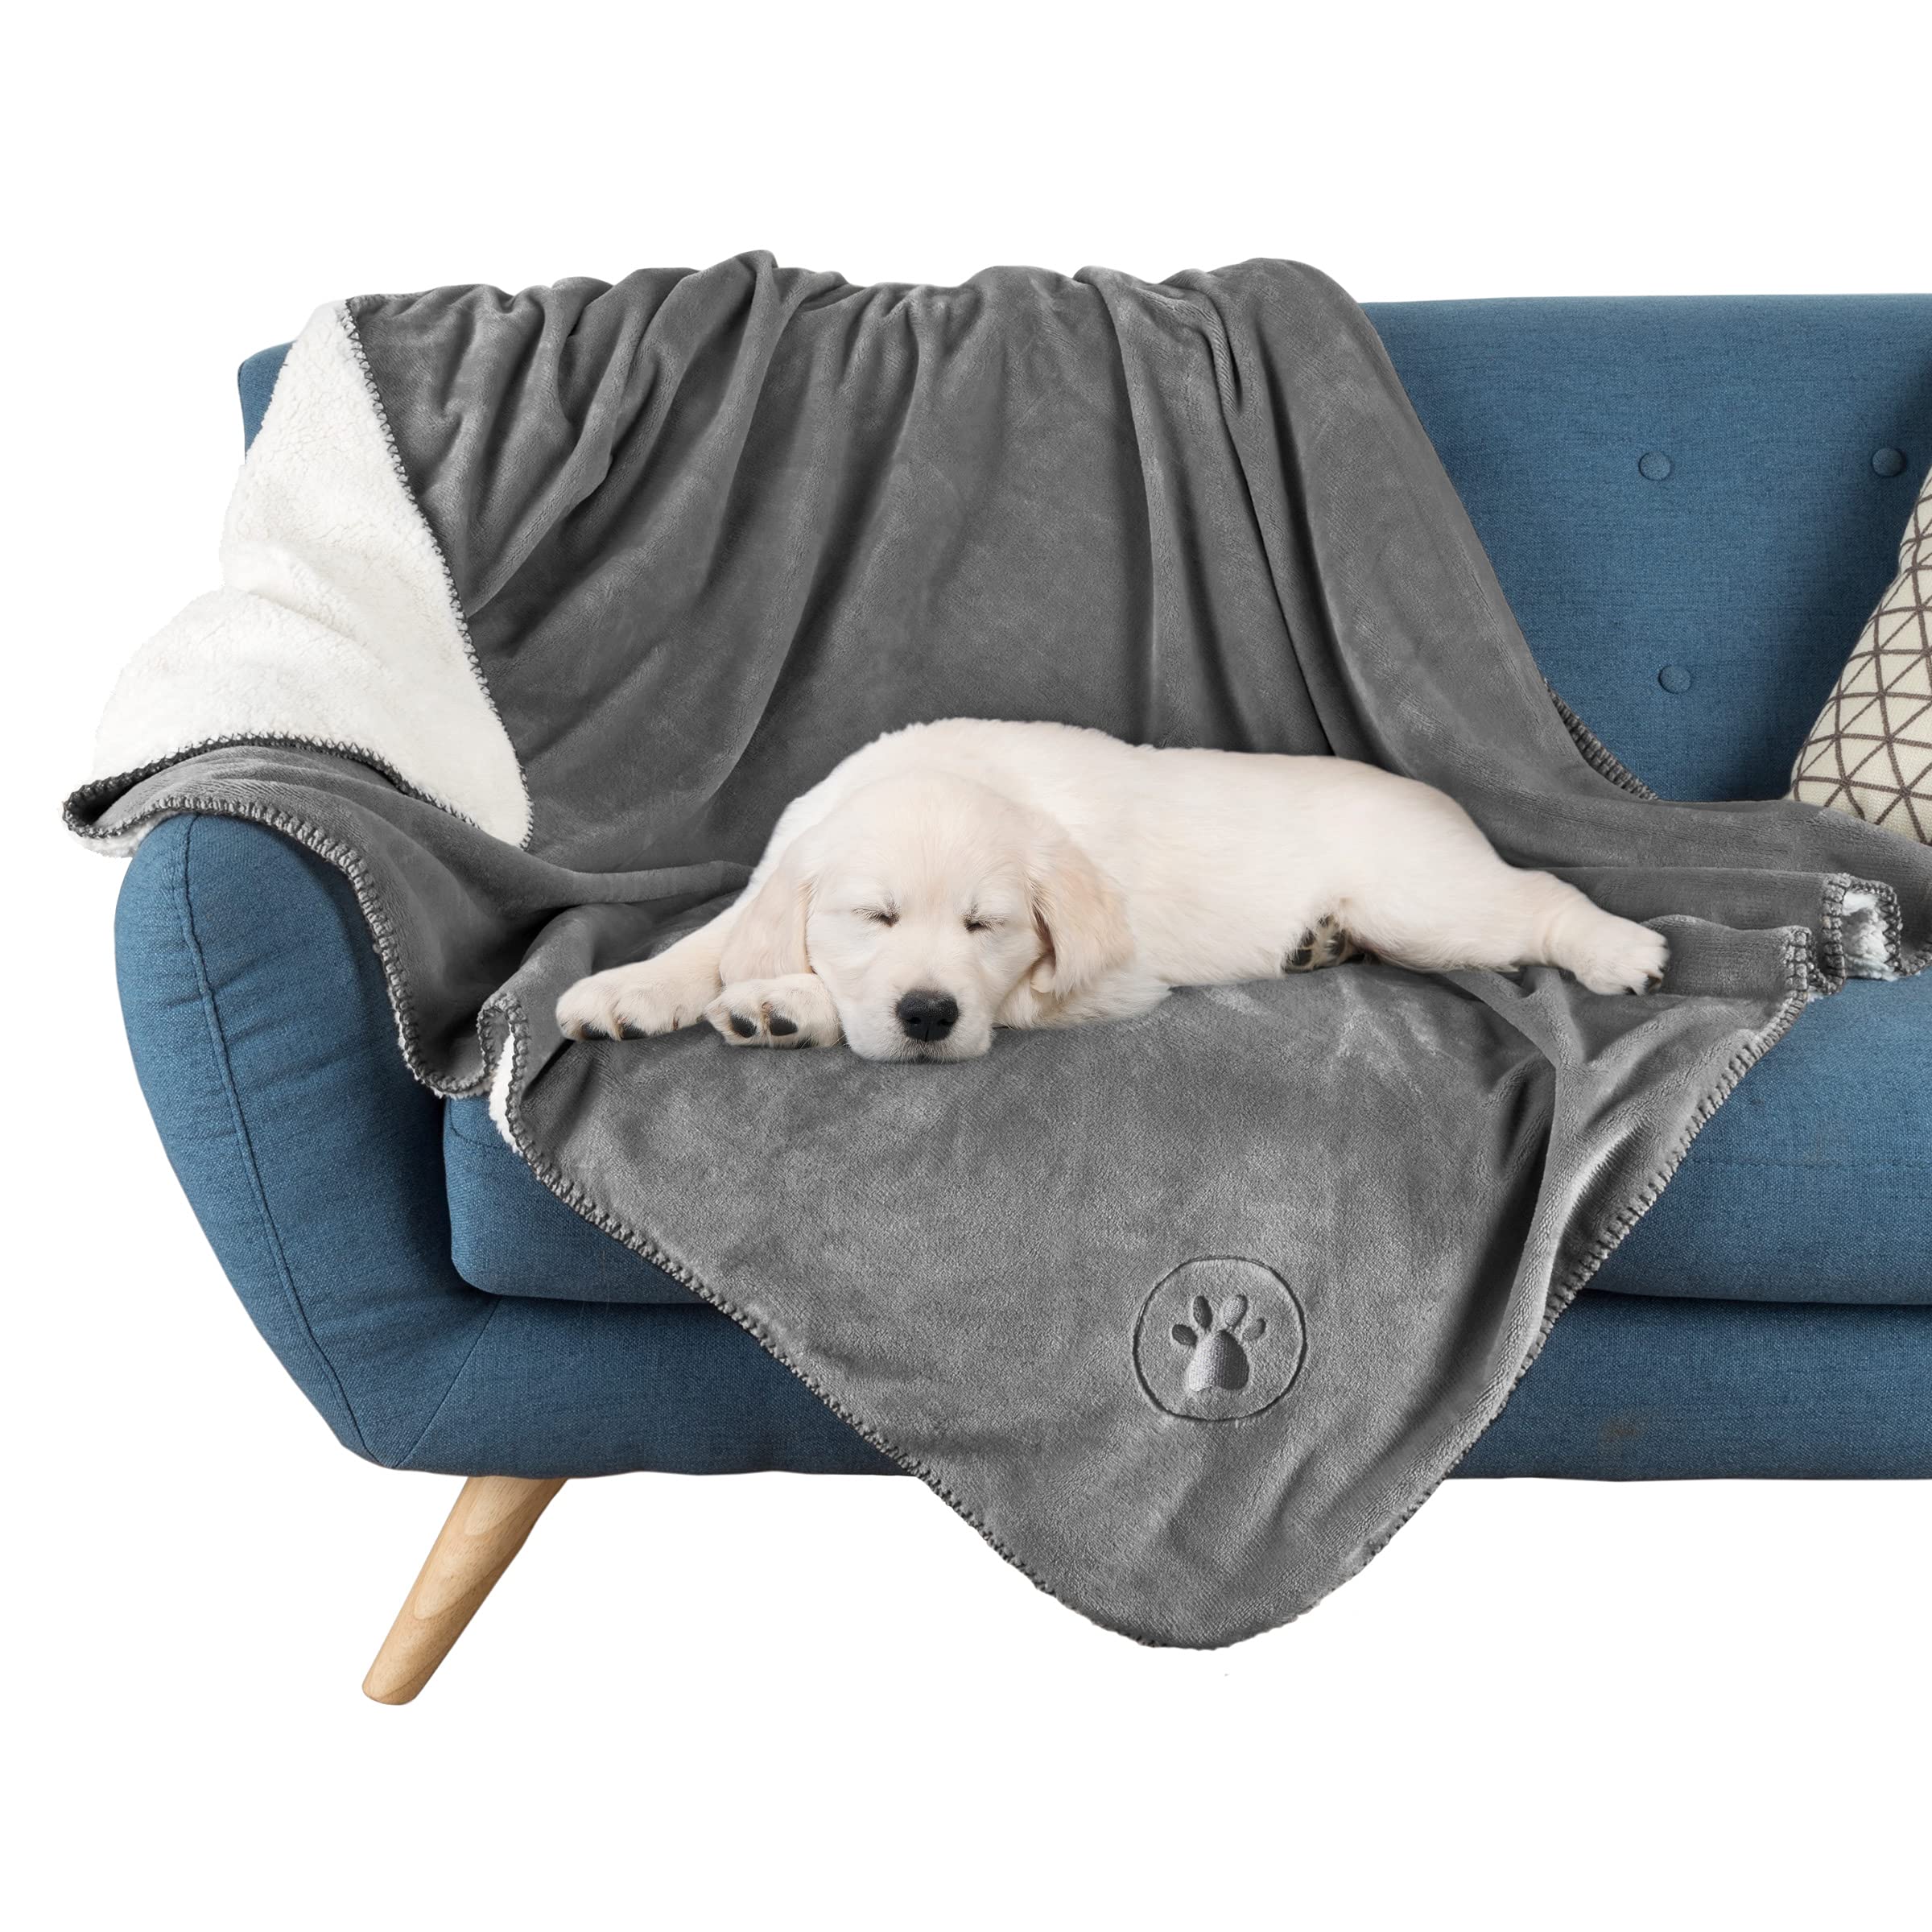 100% Waterproof Protector Cover for Couch/Sofa by Petmaker Tan